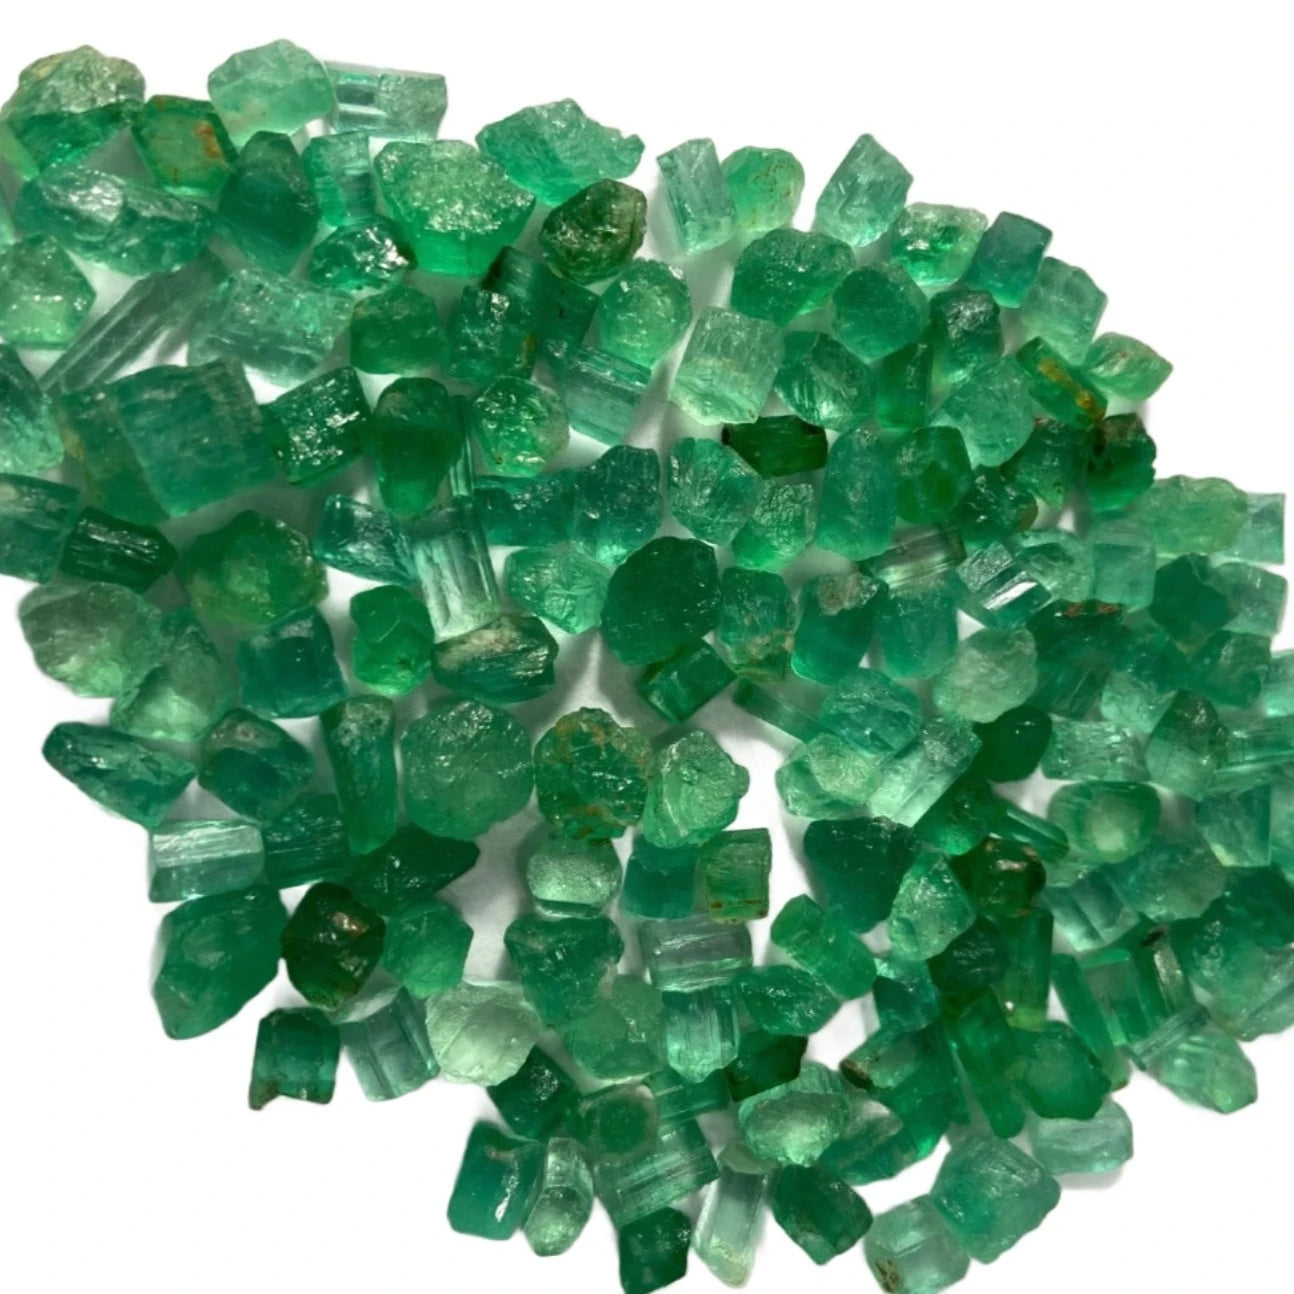 Natural Rough Emerald Stone for Cutting